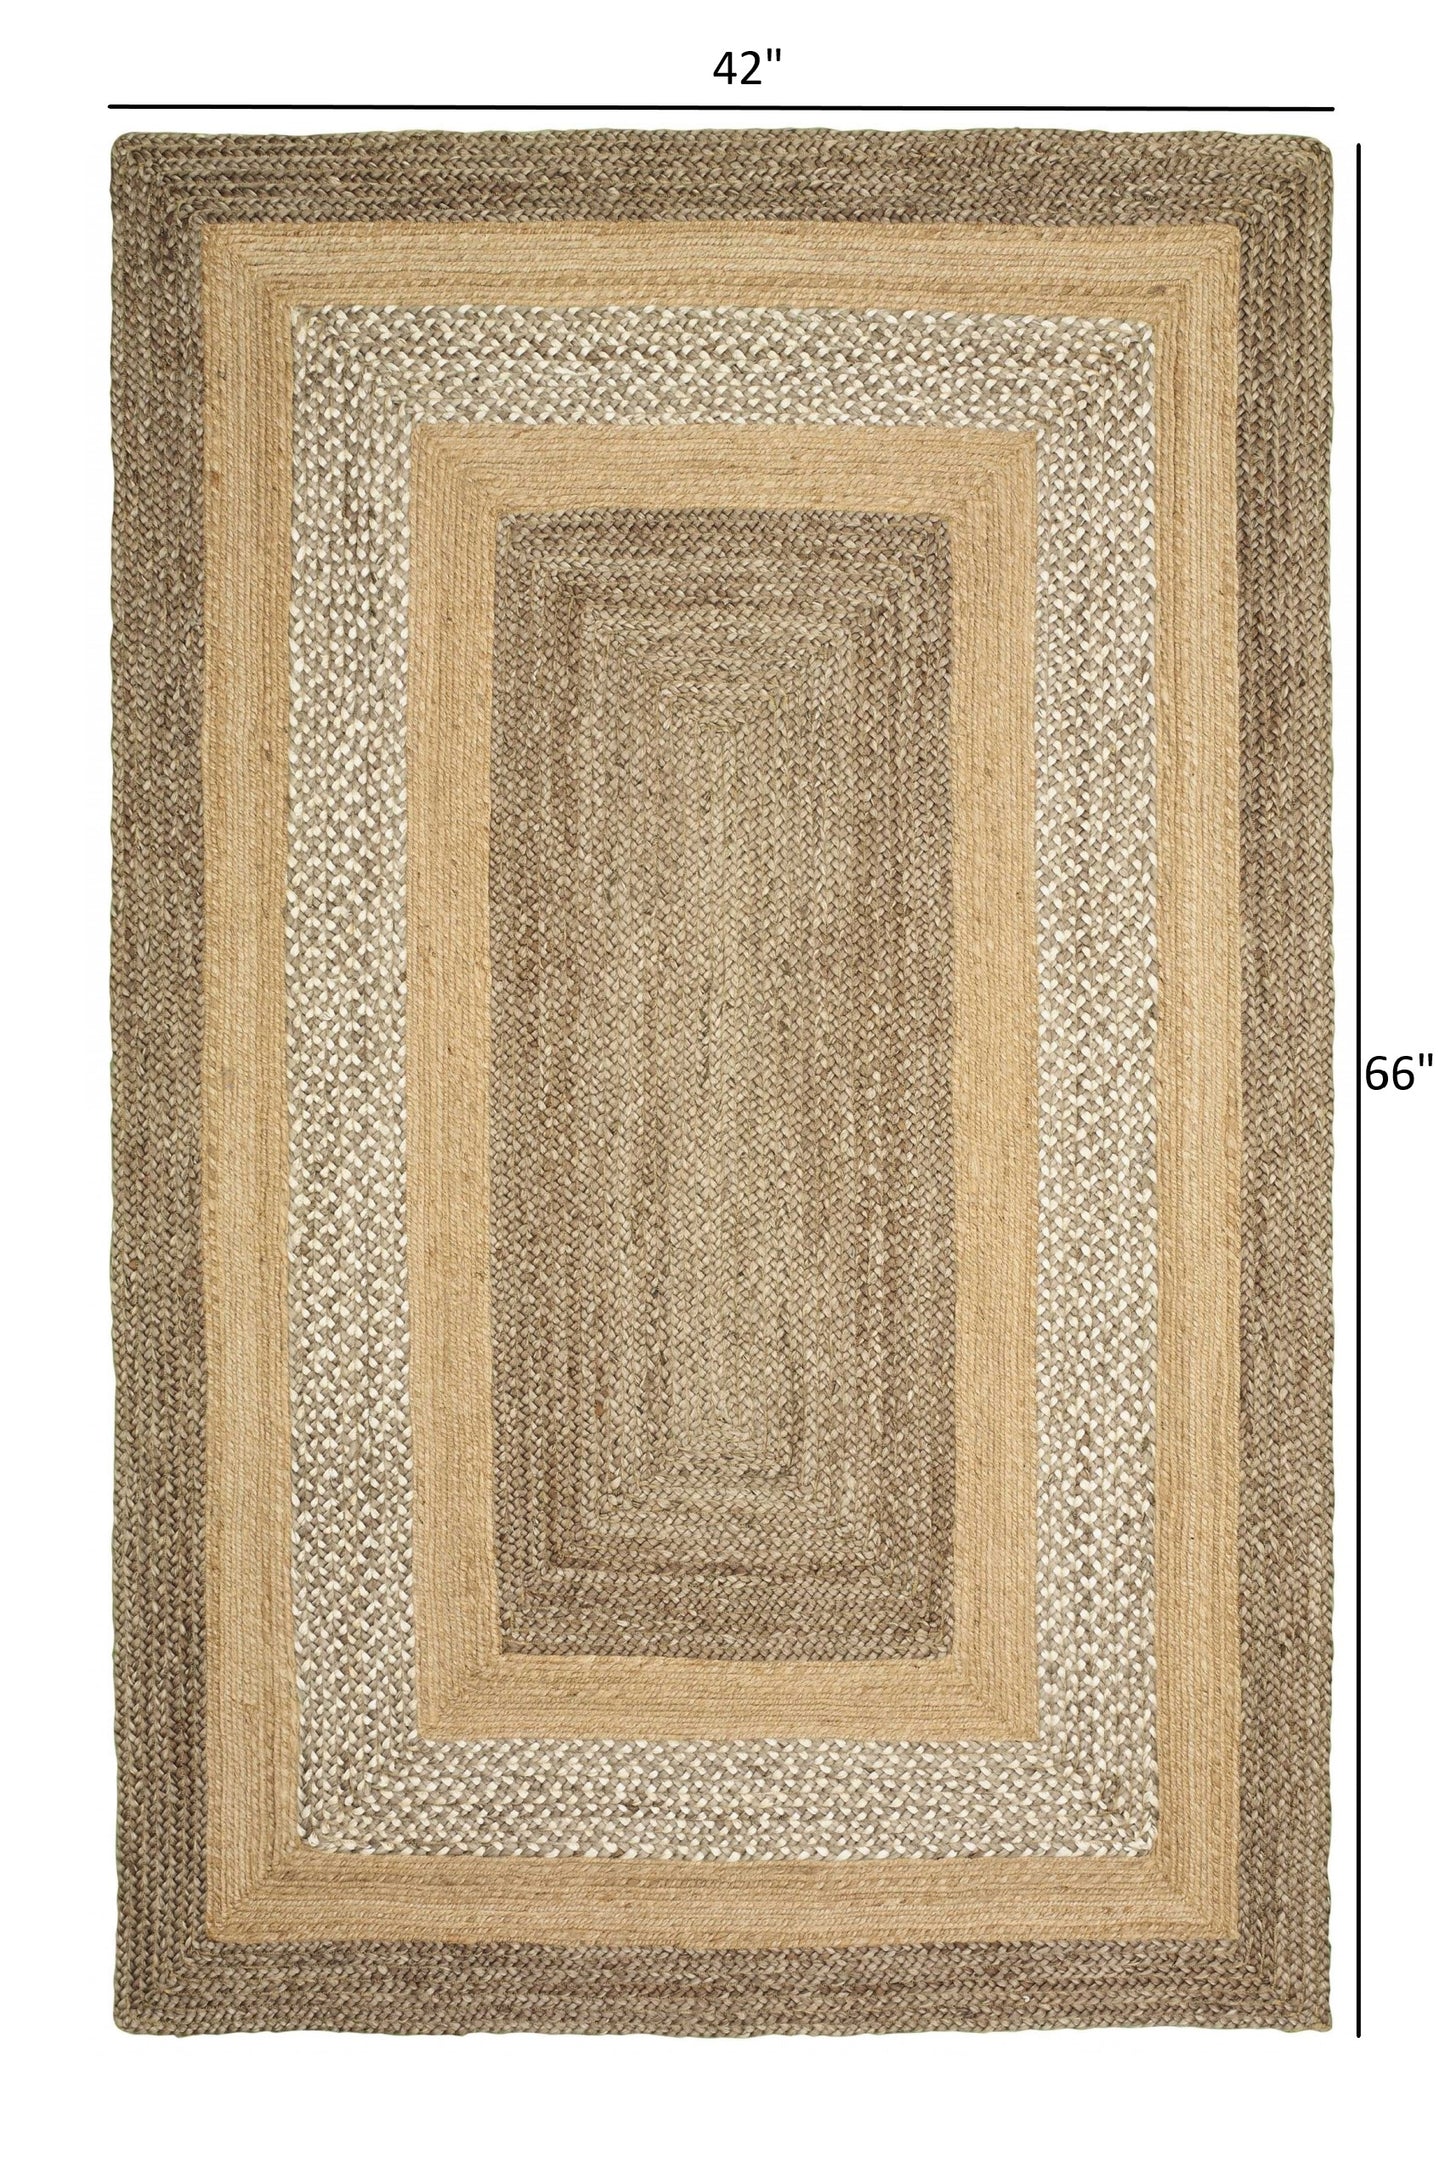 4’ x 6’ Tan and Beige Bordered Area Rug